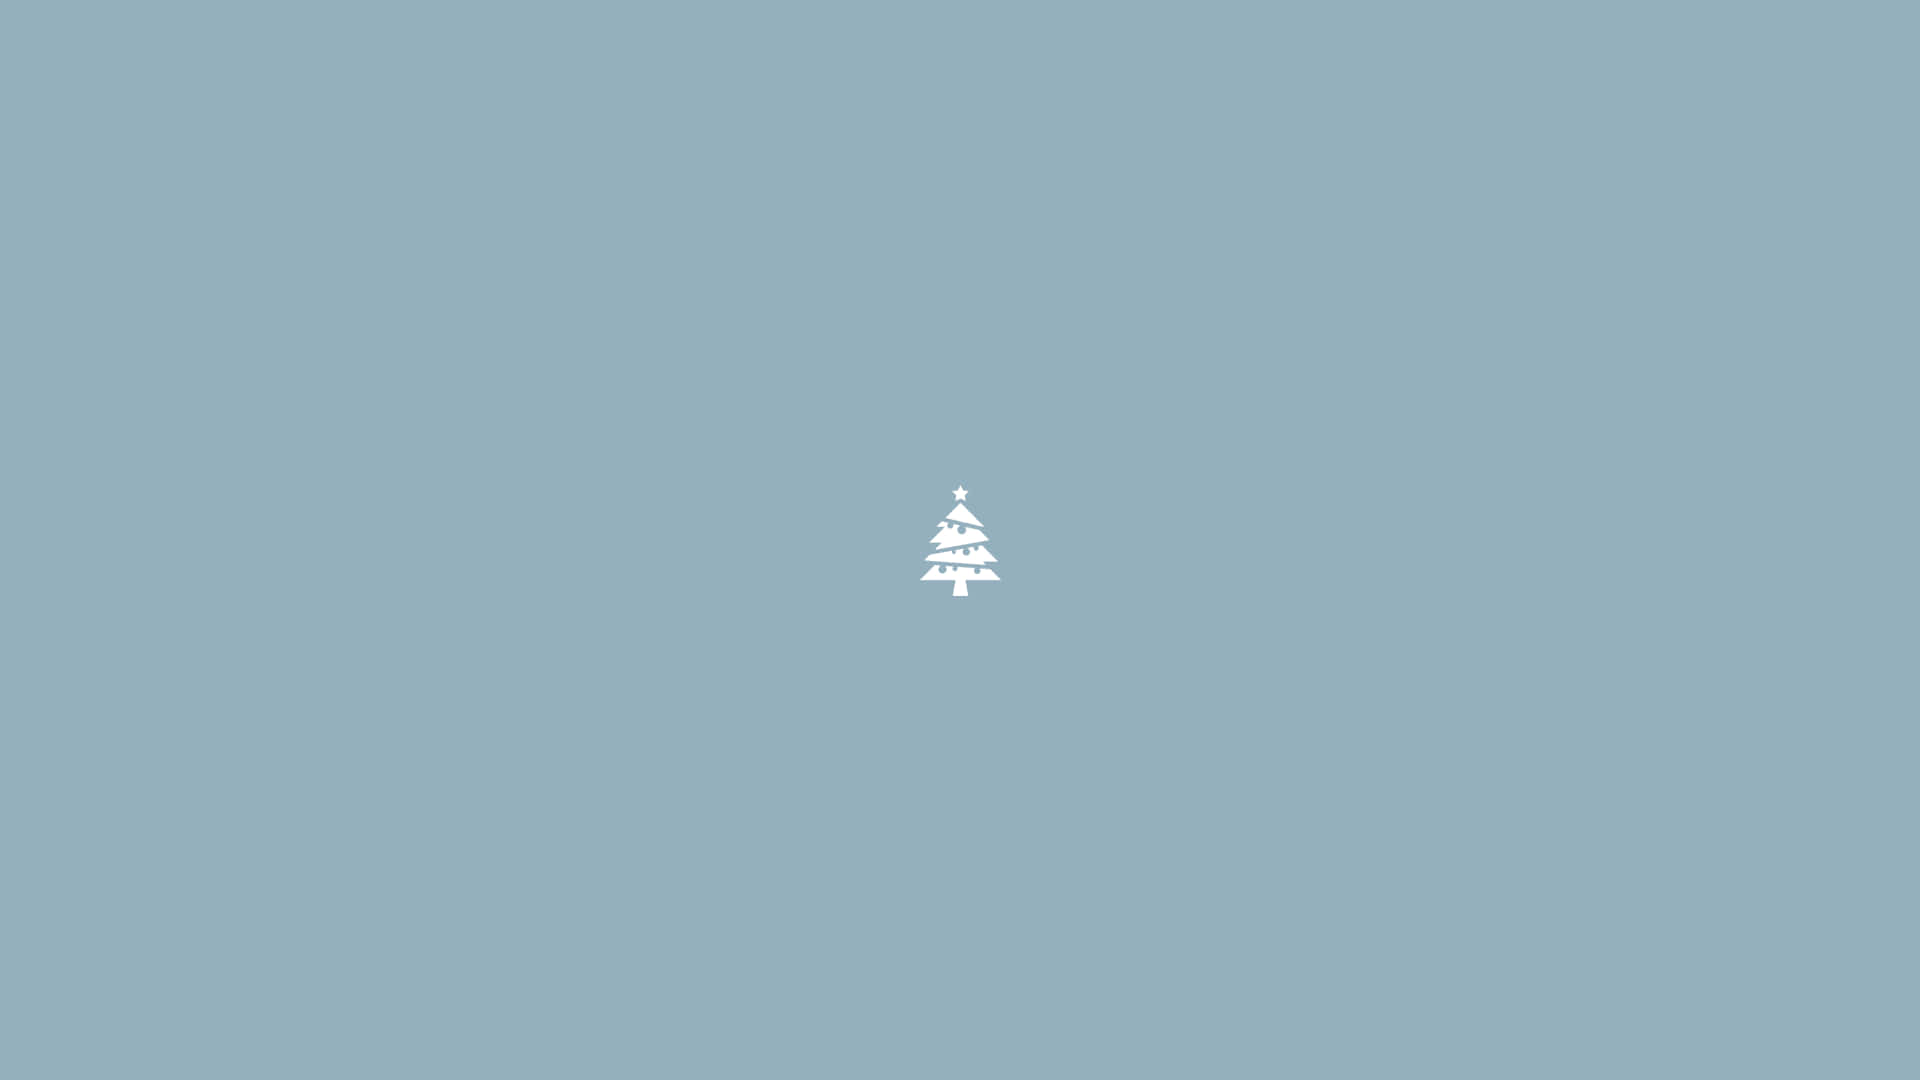 A Small Christmas Tree On A Blue Background Wallpaper